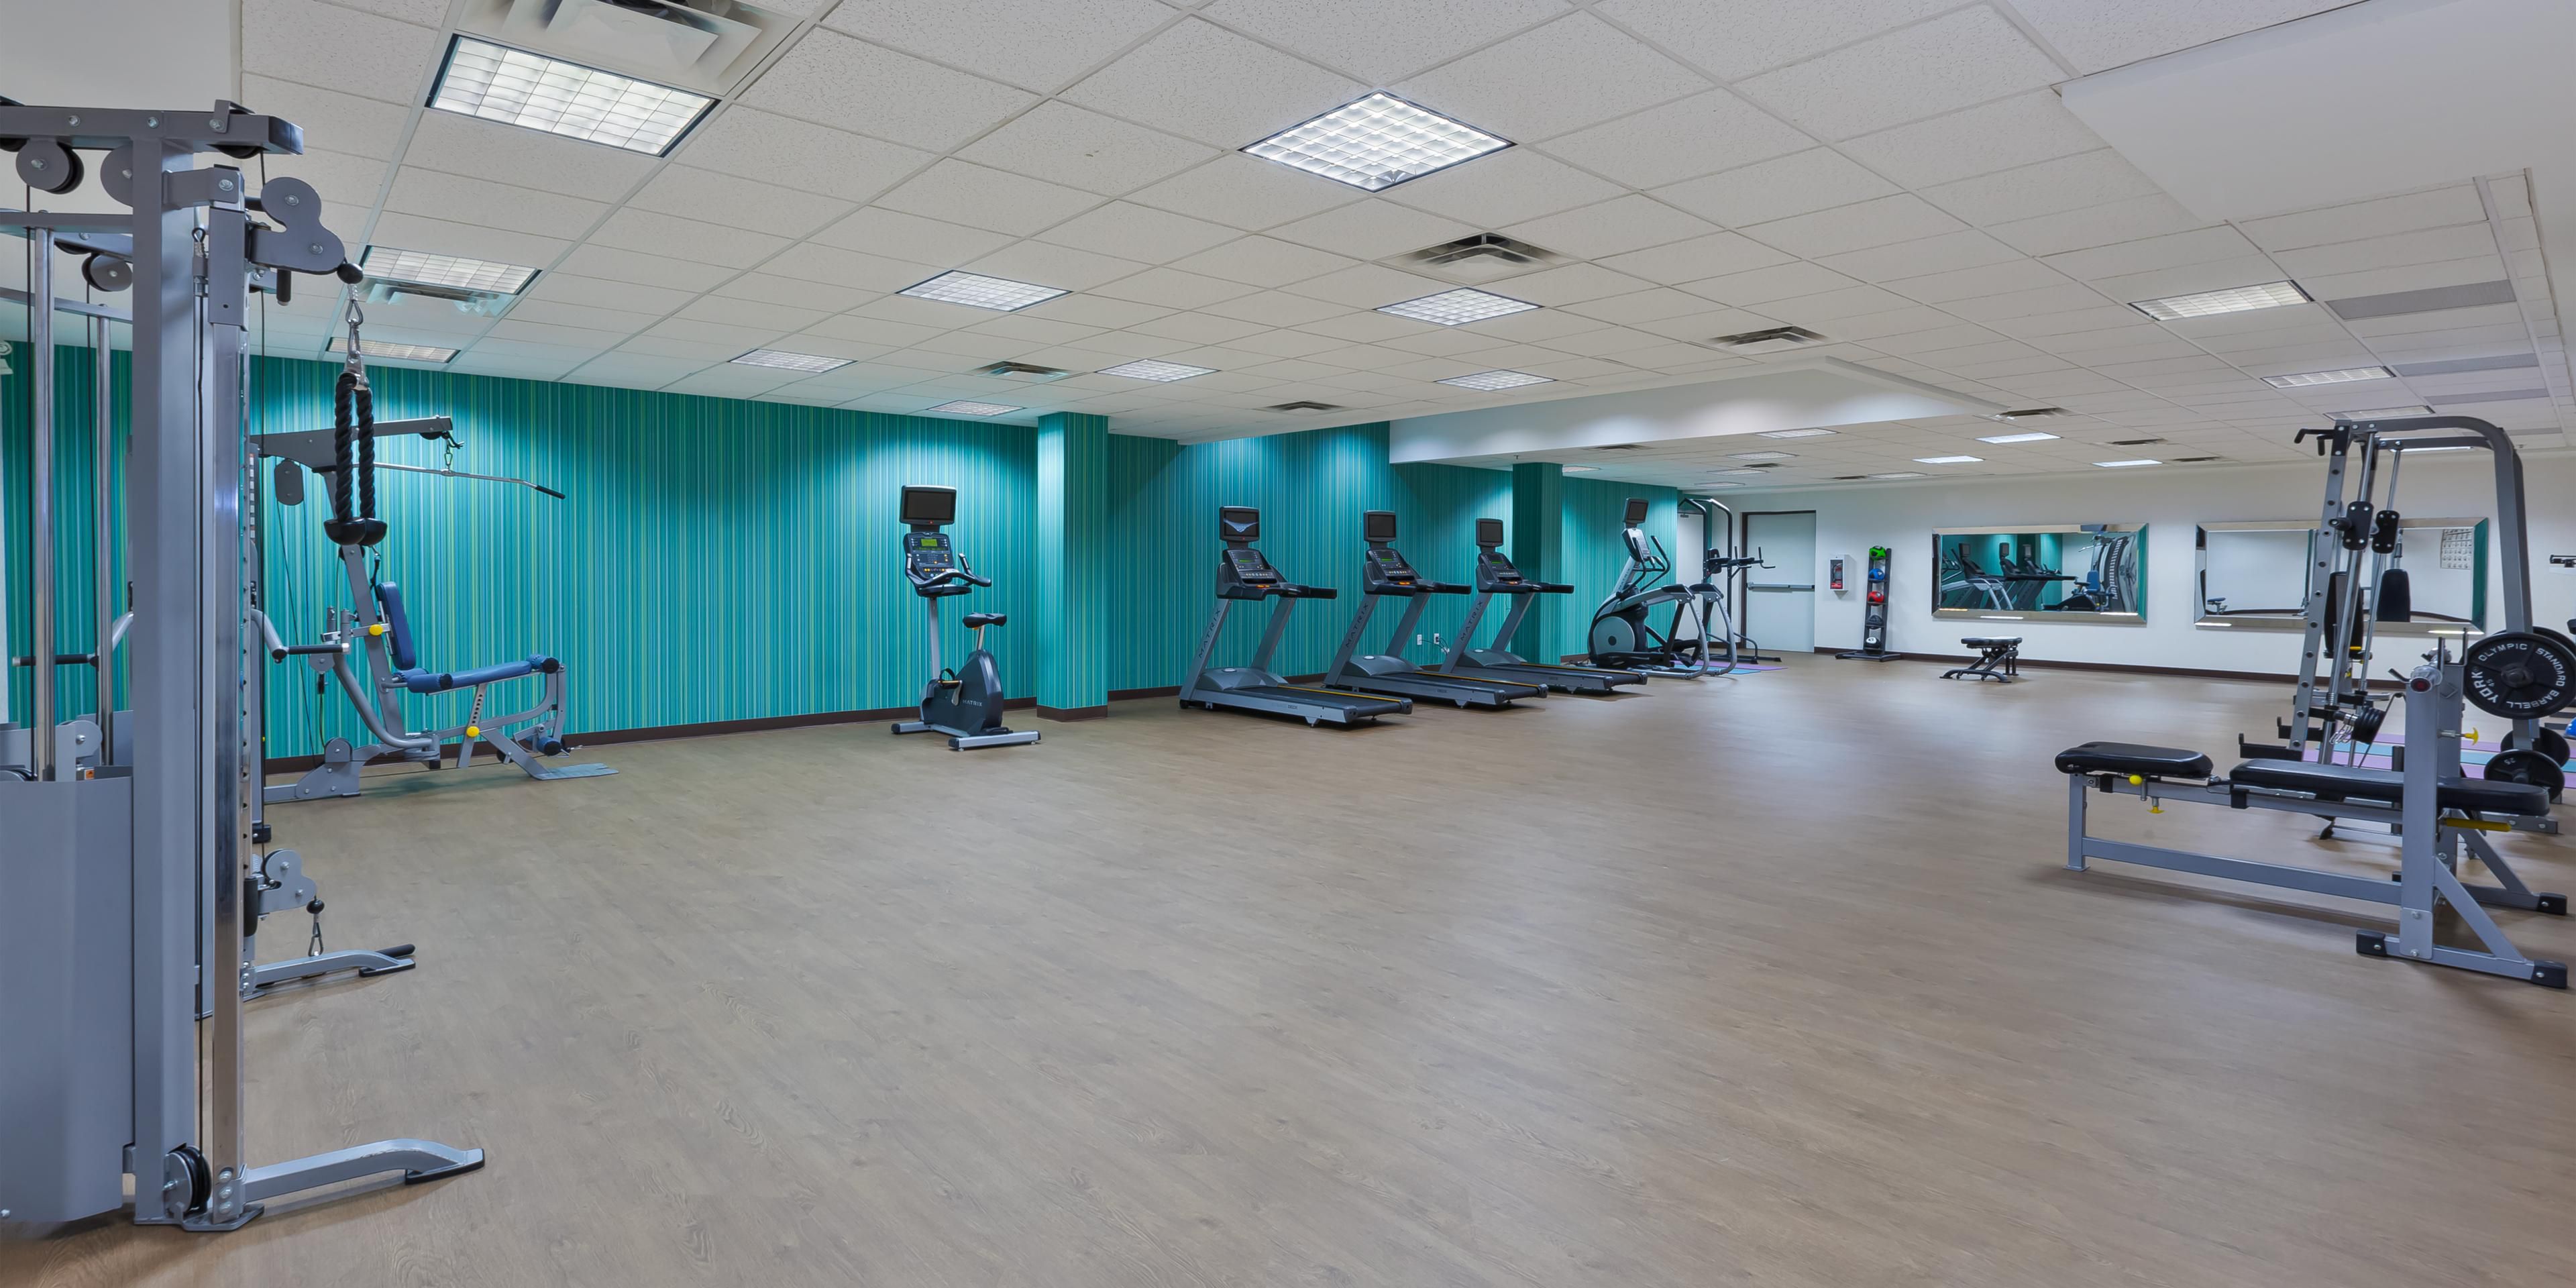 Our Fitness Center is a 1,500 sq.ft., stylish state of the art fitness facility located in the hotel. We feature the latest in training equipment.